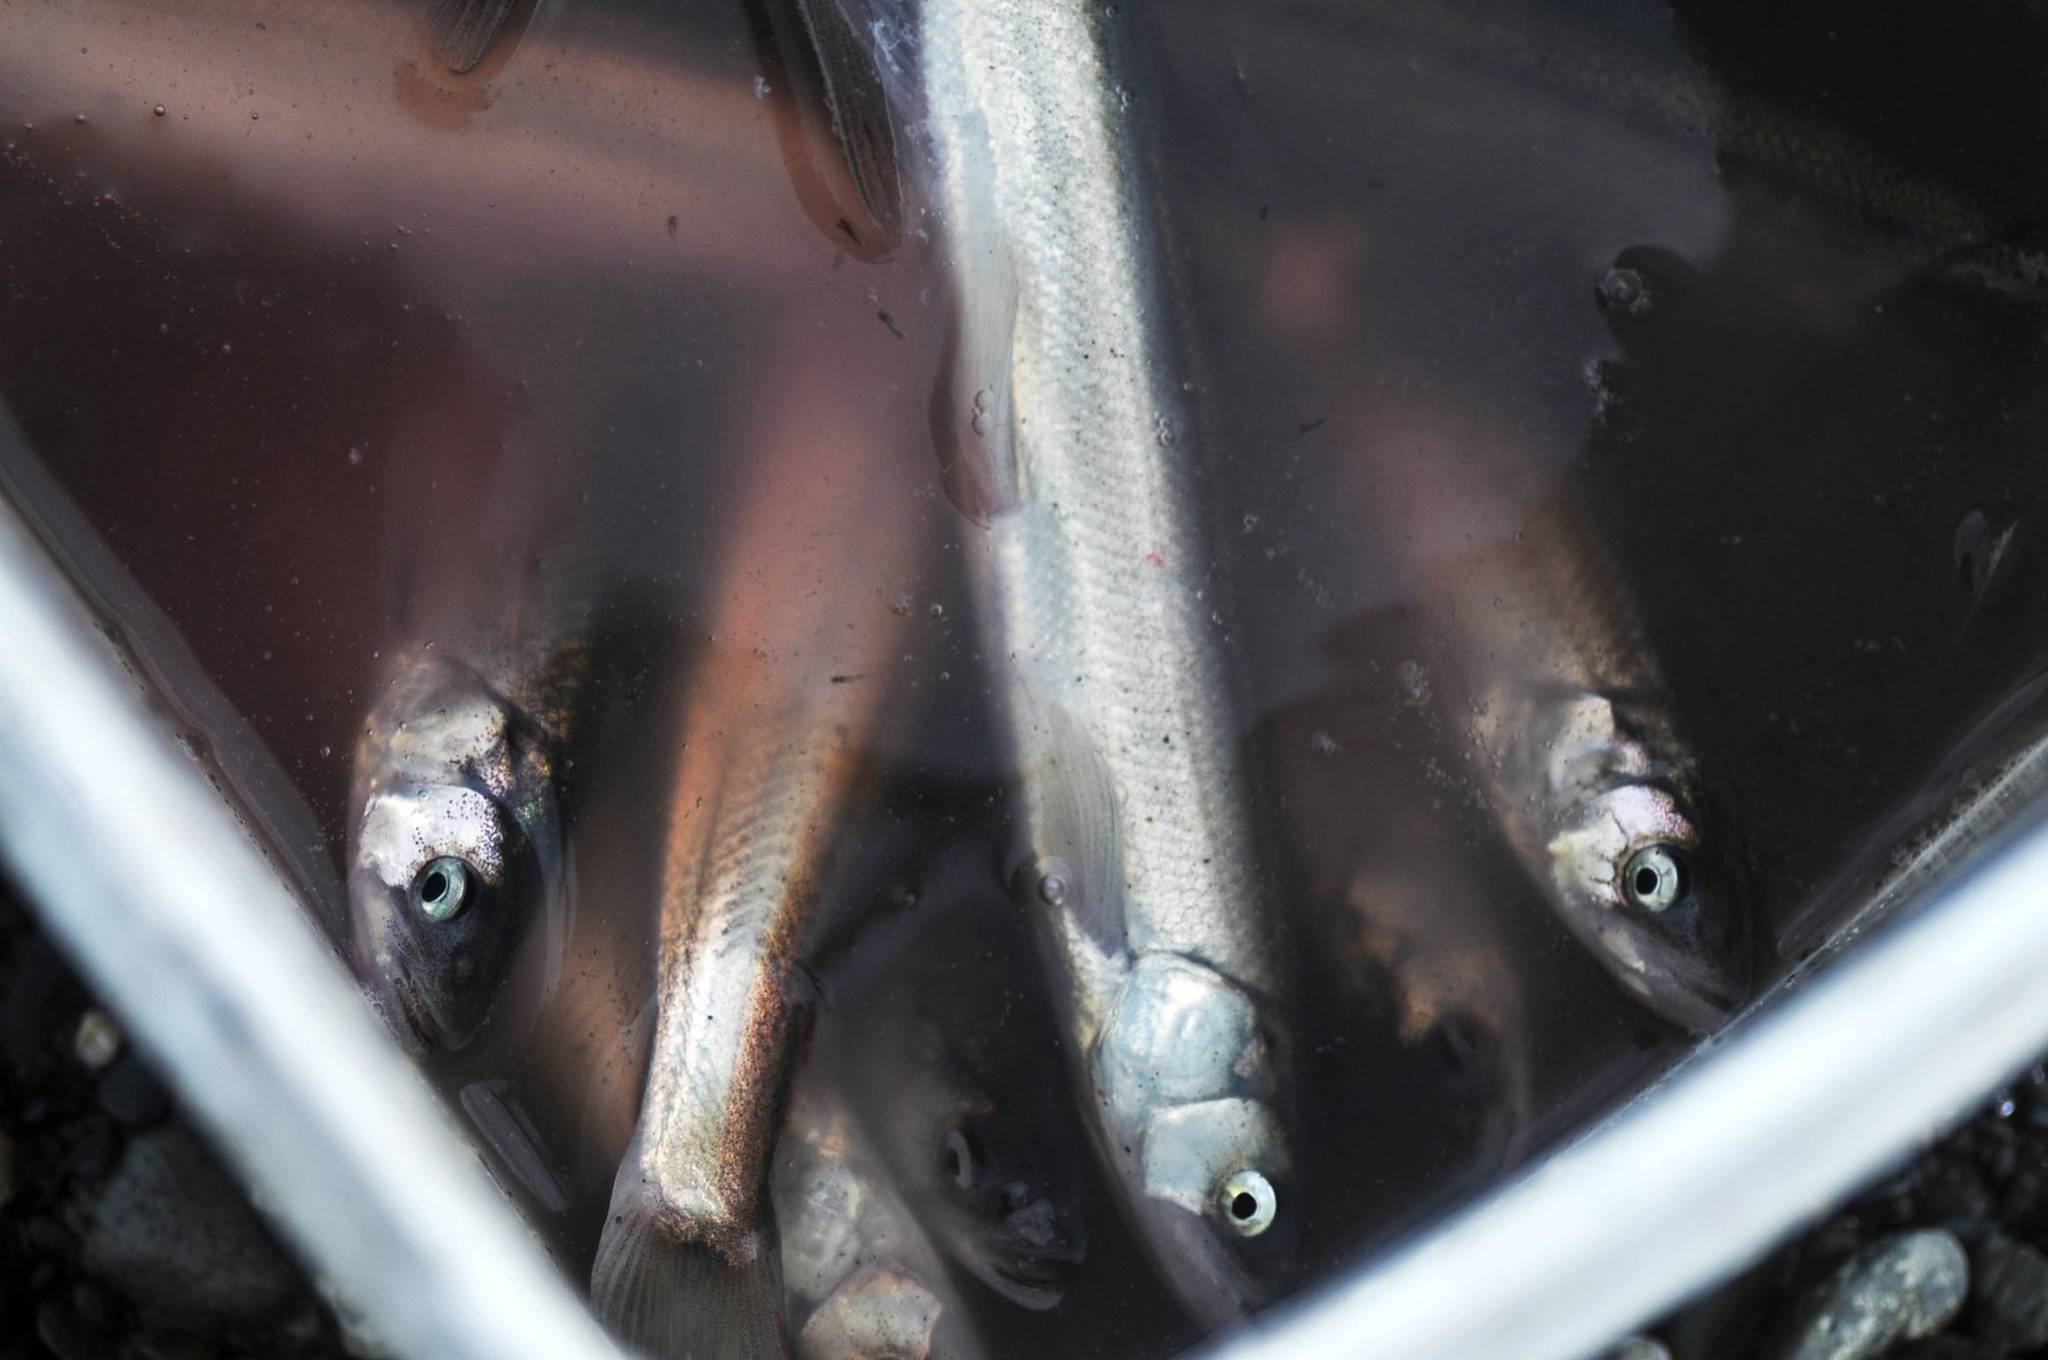 In this May 2016 photo, harvested eulachon float in a personal use fisherman’s bucket on the north bank of the Kenai River in Kenai, Alaska. Eulachon, also called hooligan, are a type of smelt that returns in schools to rivers all over Southcentral Alaska each spring. The state Board of Fisheries recently approved a measure doubling the quota a small comercial fishery in Upper Cook Inlet takes from 100 tons to 200 tons each year, a small fraction of the total estimated biomass of about 48,000 tons, according to a Feb. 9 memo from the Alaska Department of Fish and Game. (Elizabeth Earl/Peninsula Clarion, file)